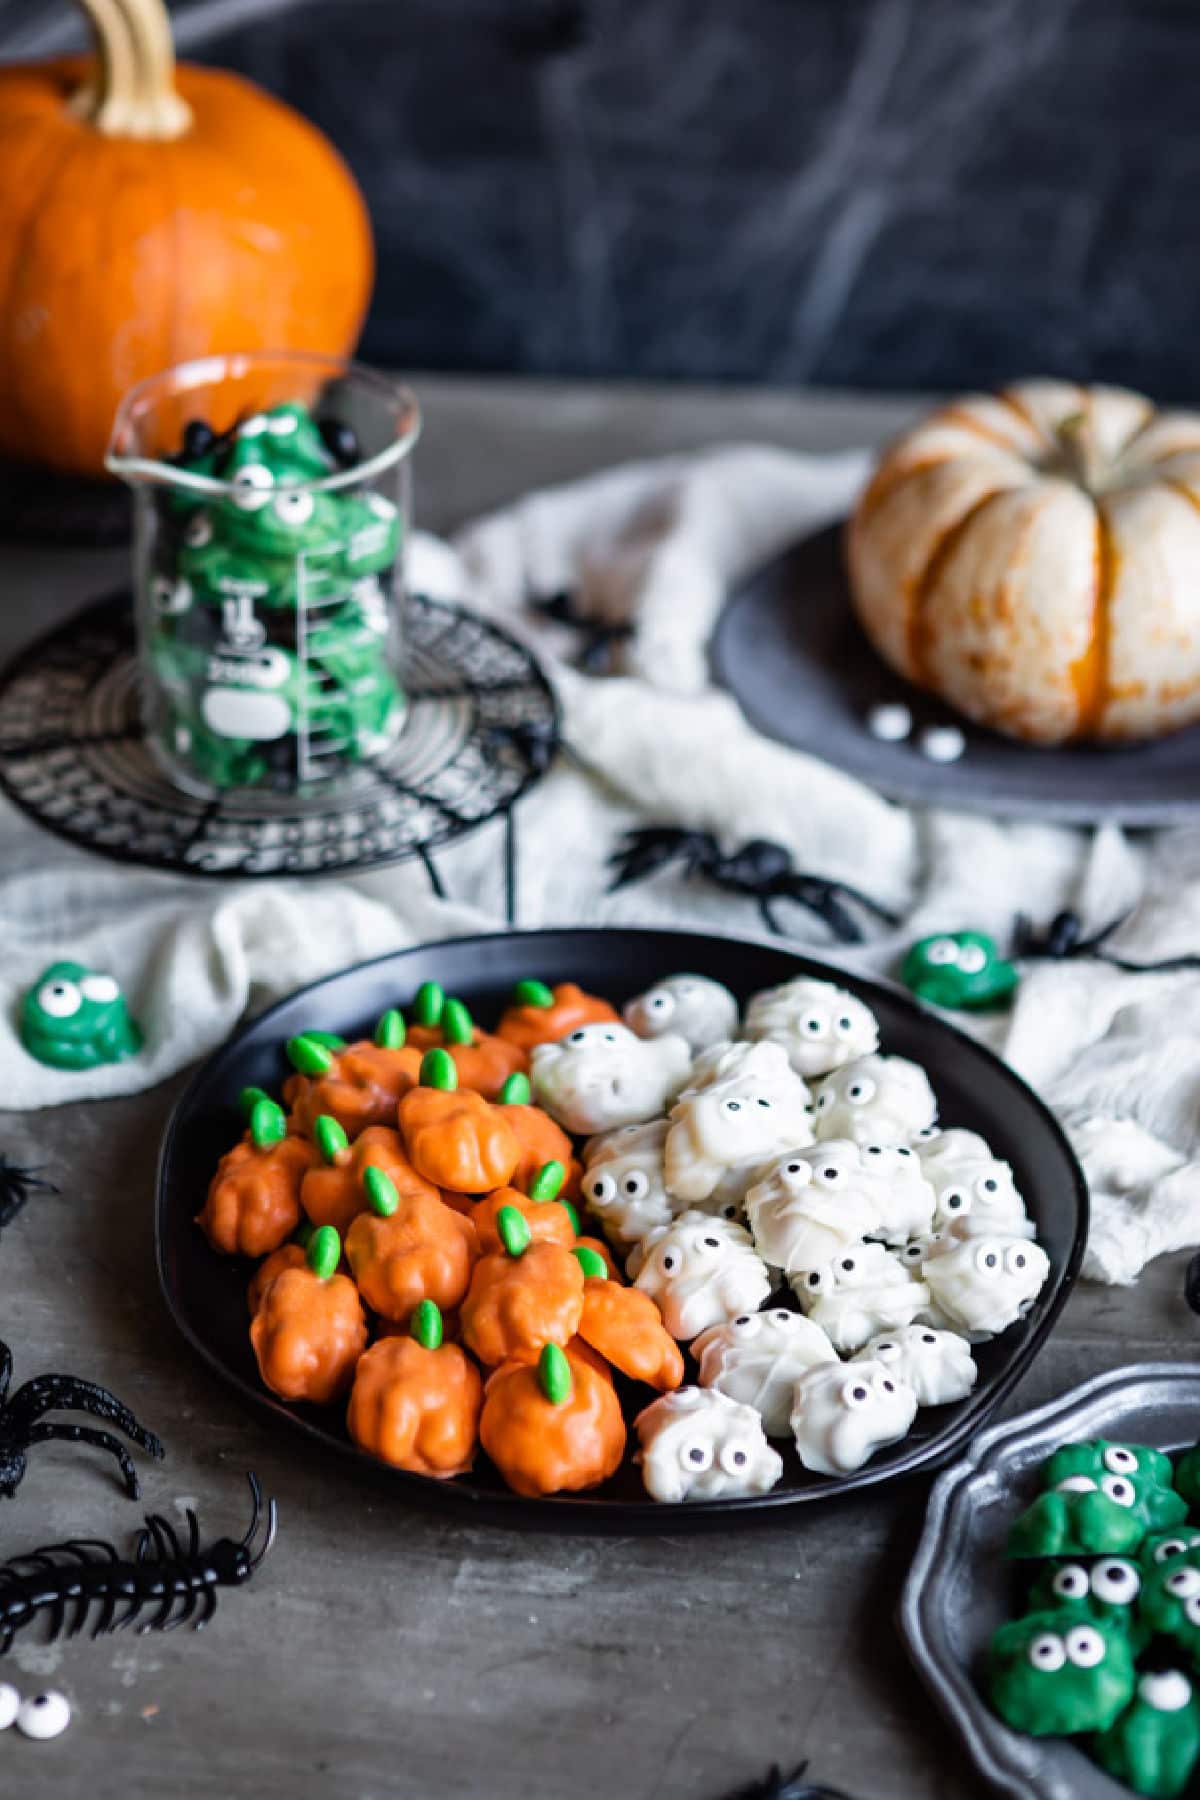 A plate of Halloween walnuts decorated to look like pumpkins and mummies.